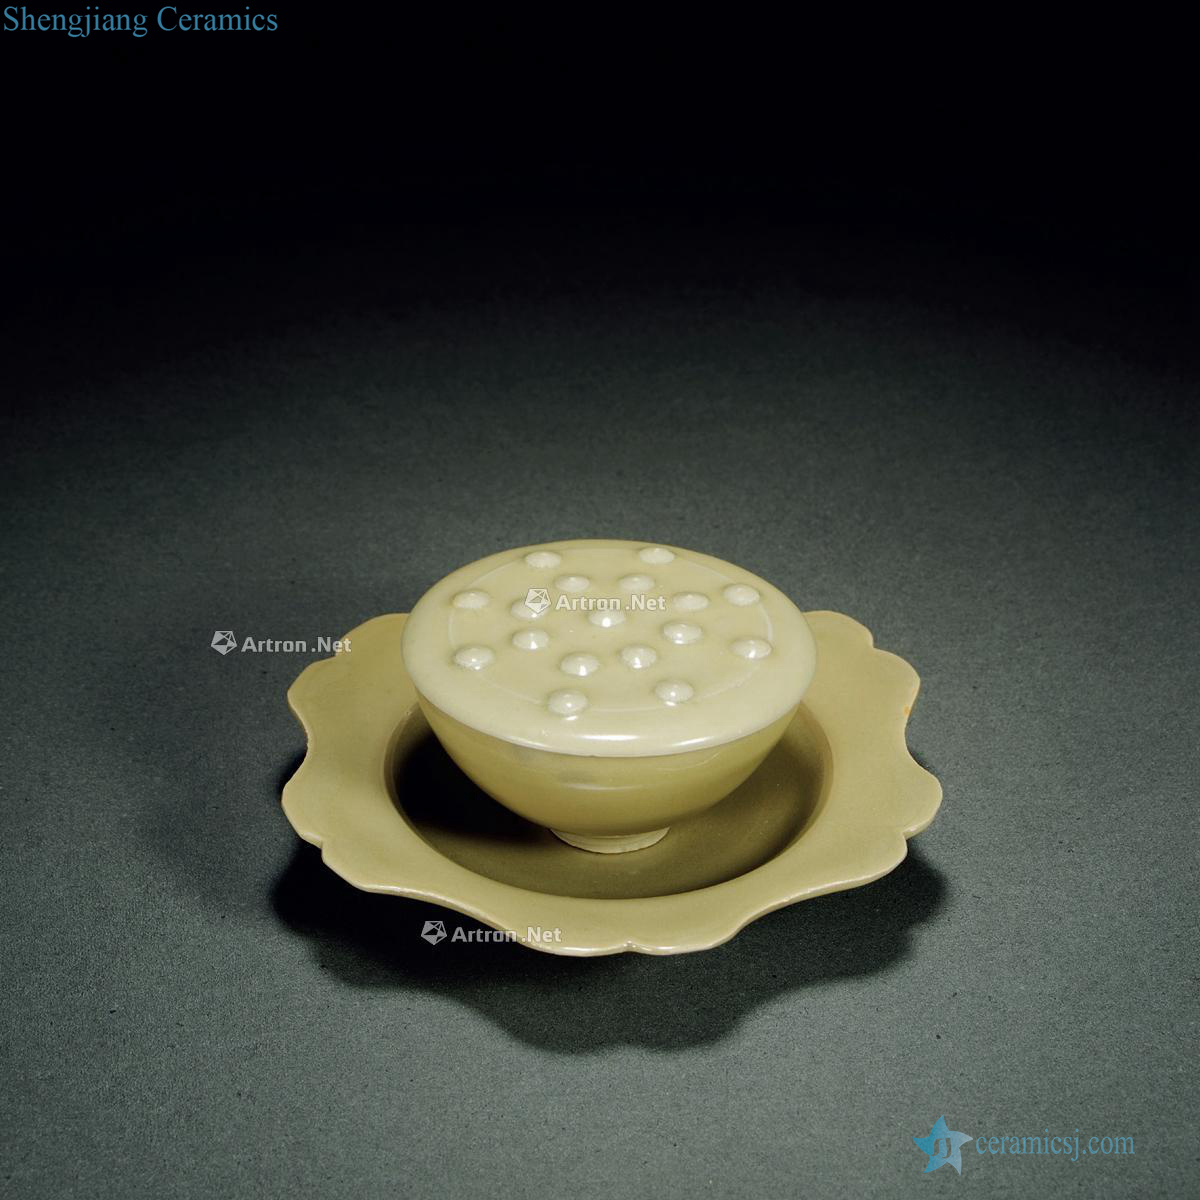 The southern song dynasty, longquan celadon glaze huang lotus seed cup